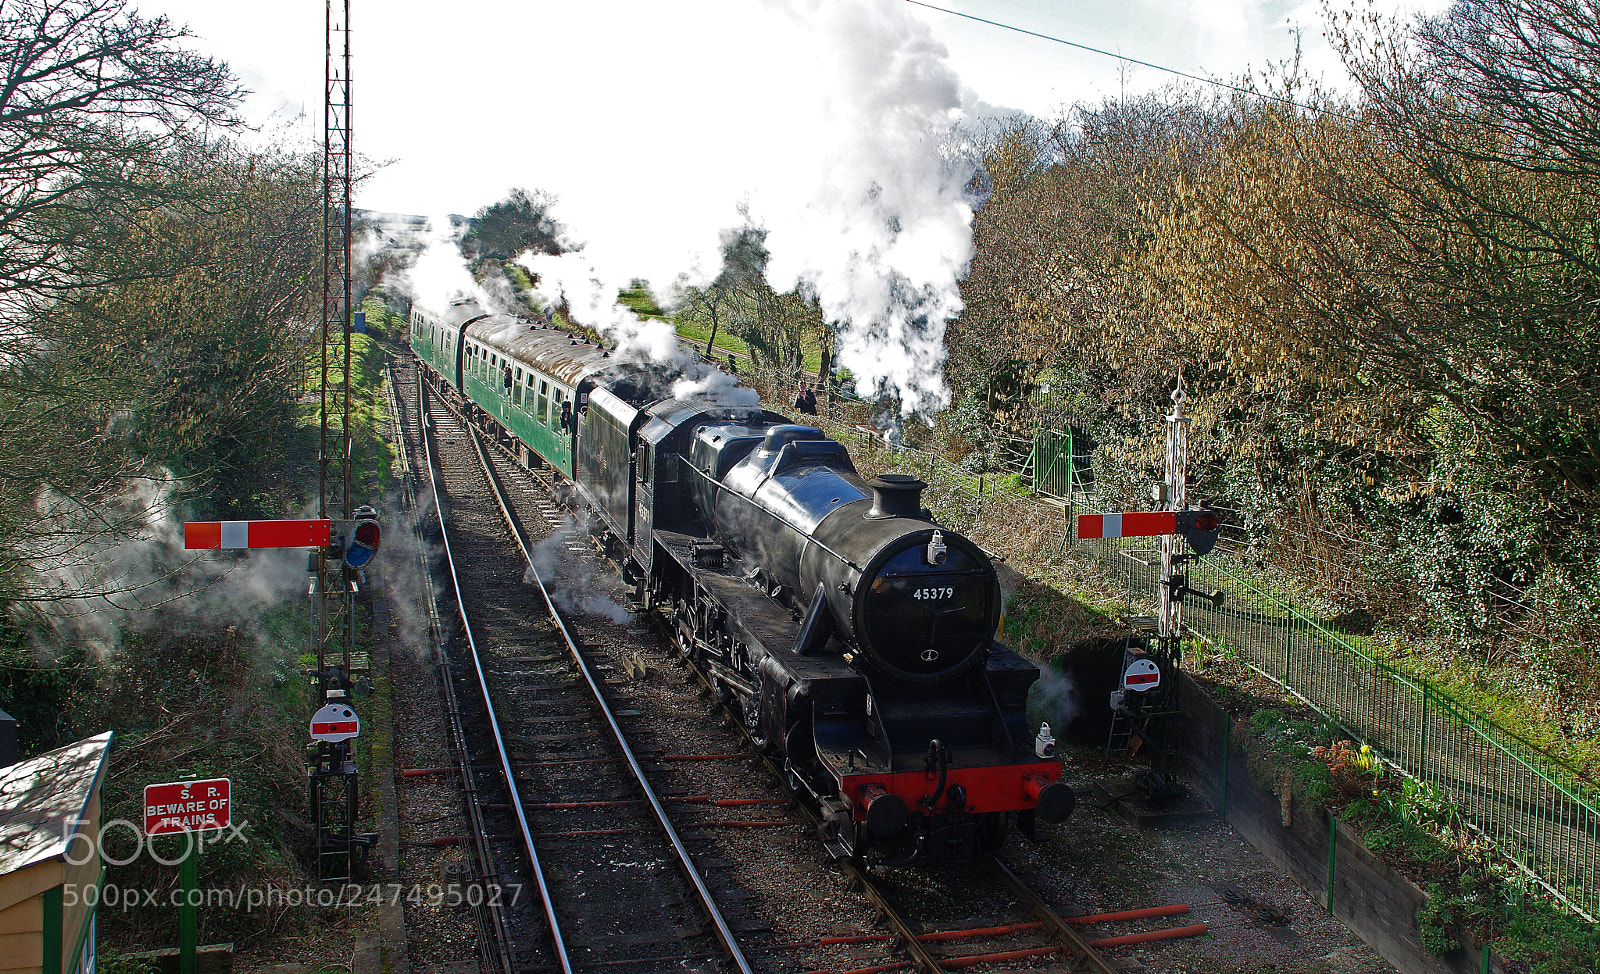 Pentax K-3 sample photo. Rd16274.  45379 arriving at ropley. photography